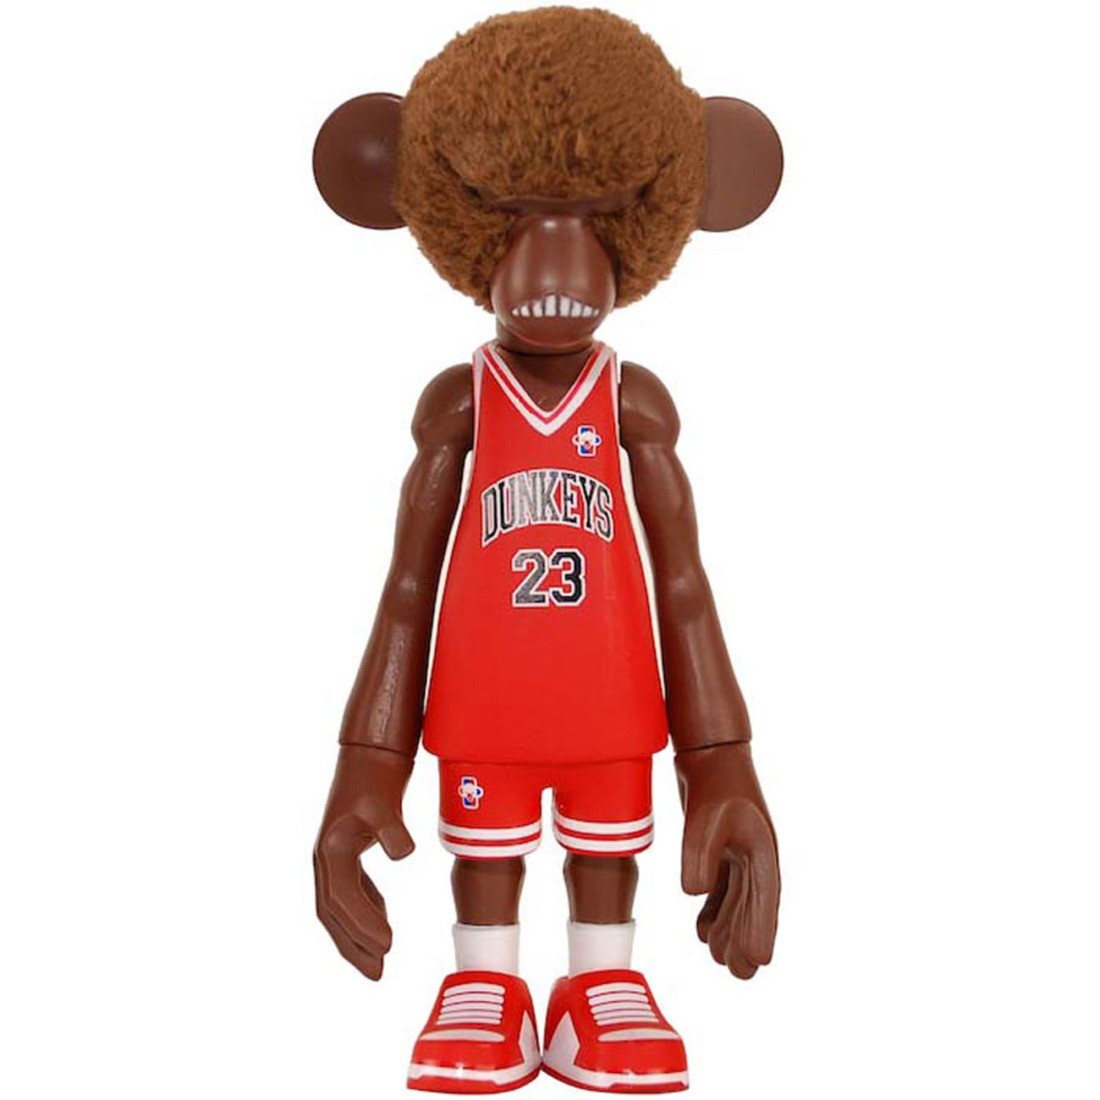 MINDstyle x CoolRain Dunkey #23 Pithecuse Collectible Figure (brown / red)